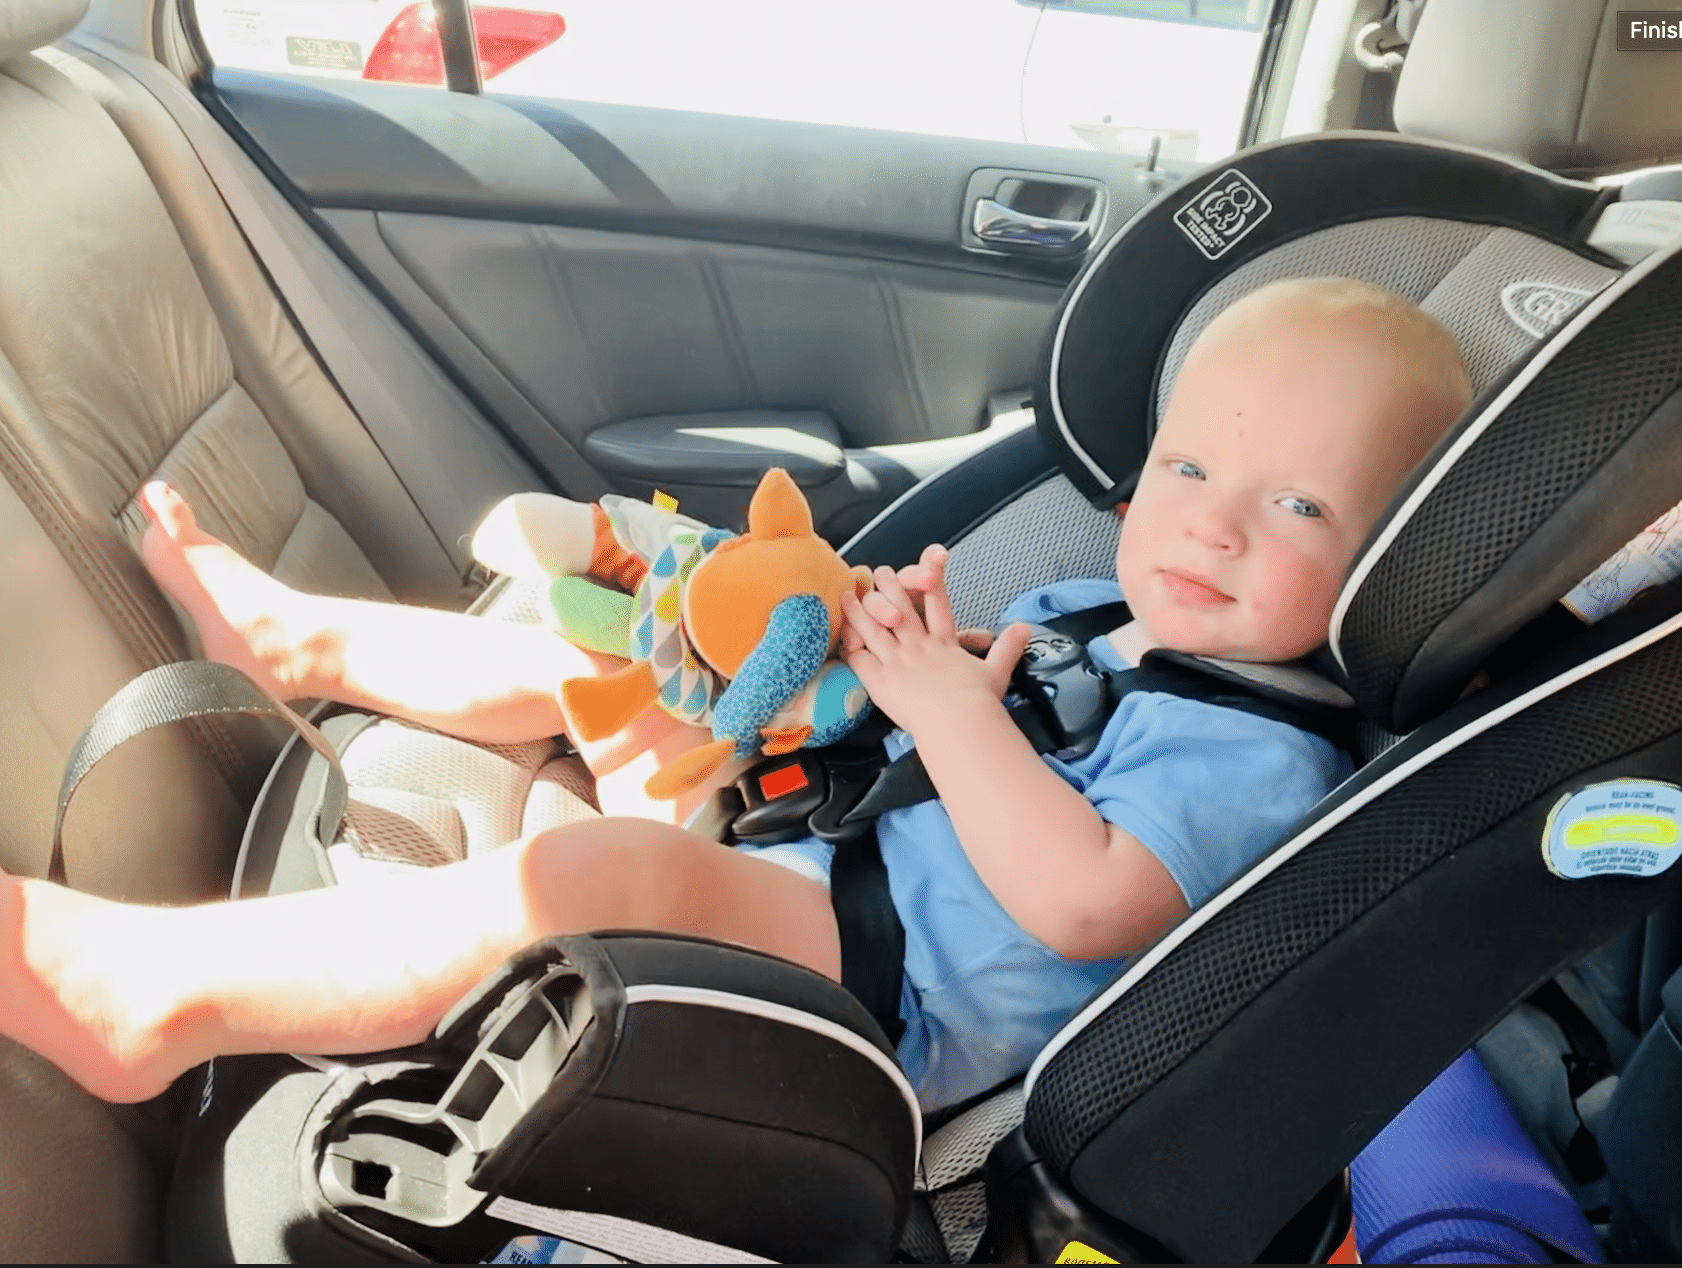 car seat 1 Trade in your used car seat September 3-13 at Birmingham Target stores